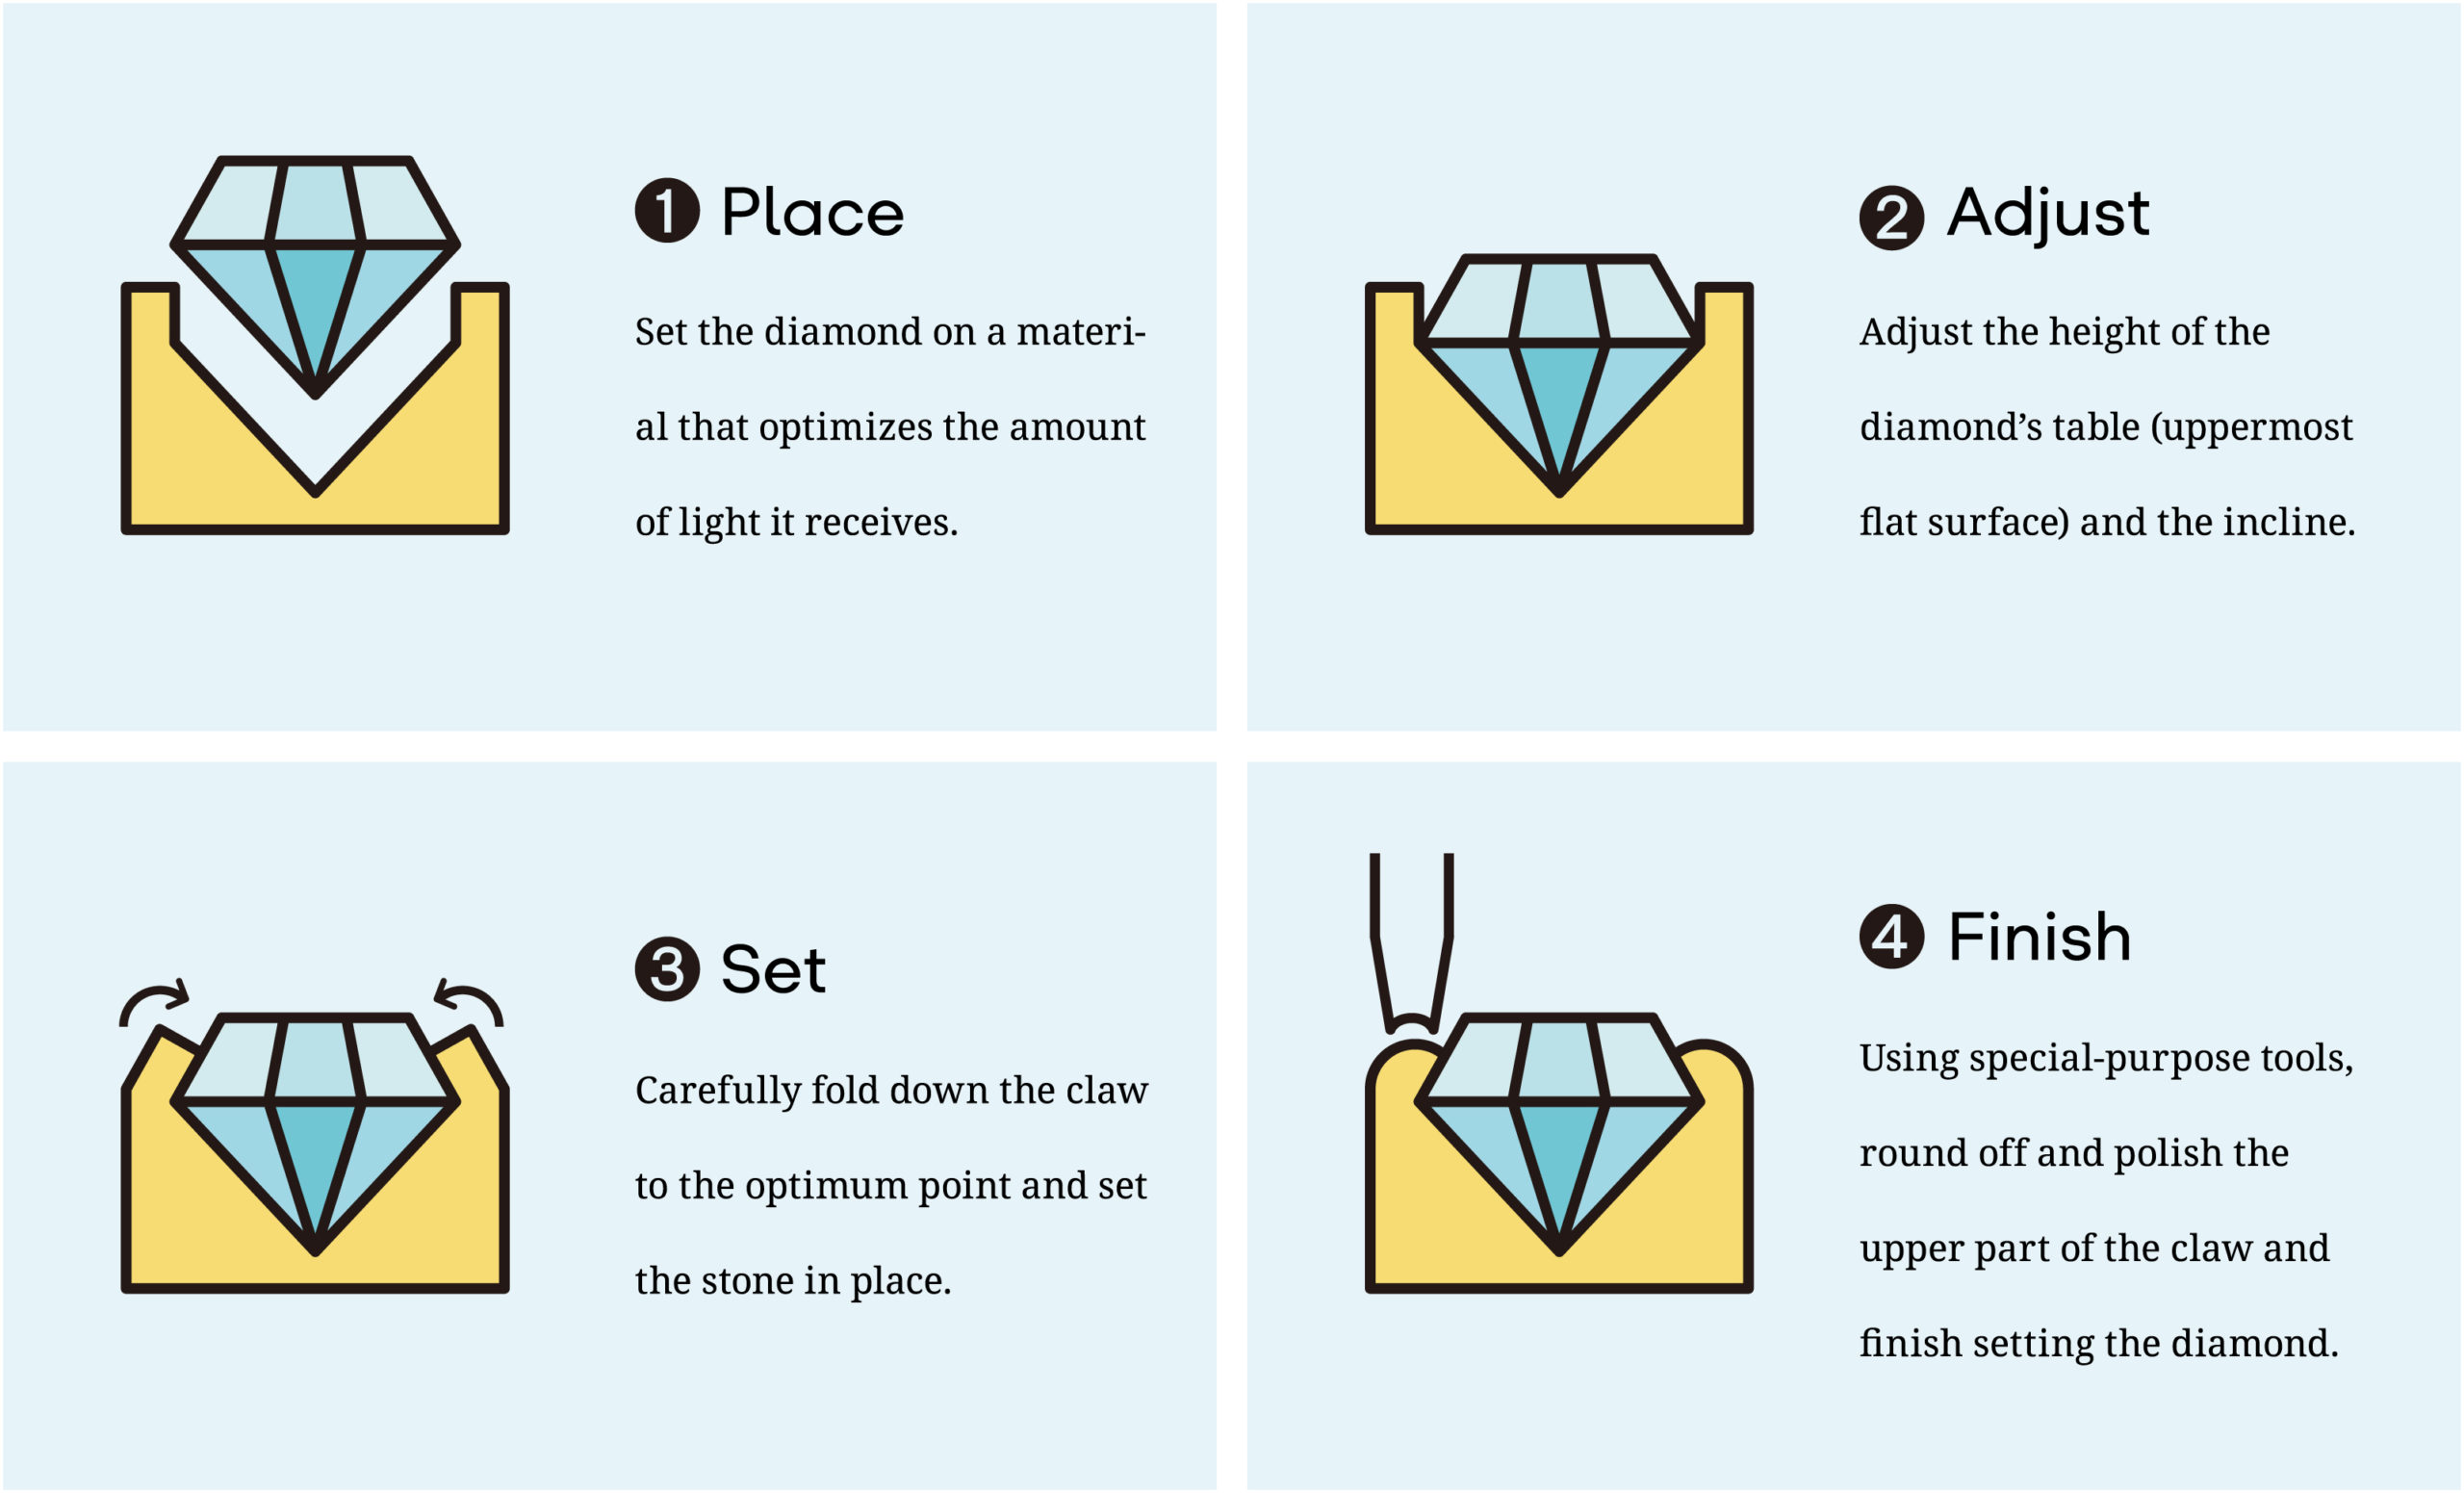 1. Place: Set the diamond on a material that optimizes the amount of light it receives. 2. Adjust: Adjust the height of the diamond's table (uppermost flat surface) and the incline. 3. Set: Carefully fold down the claw to the optimum point and set the stone in place. 4. Finish: Using special-purpose tools, round off and polish the upper part of the claw and finish setting the diamond.